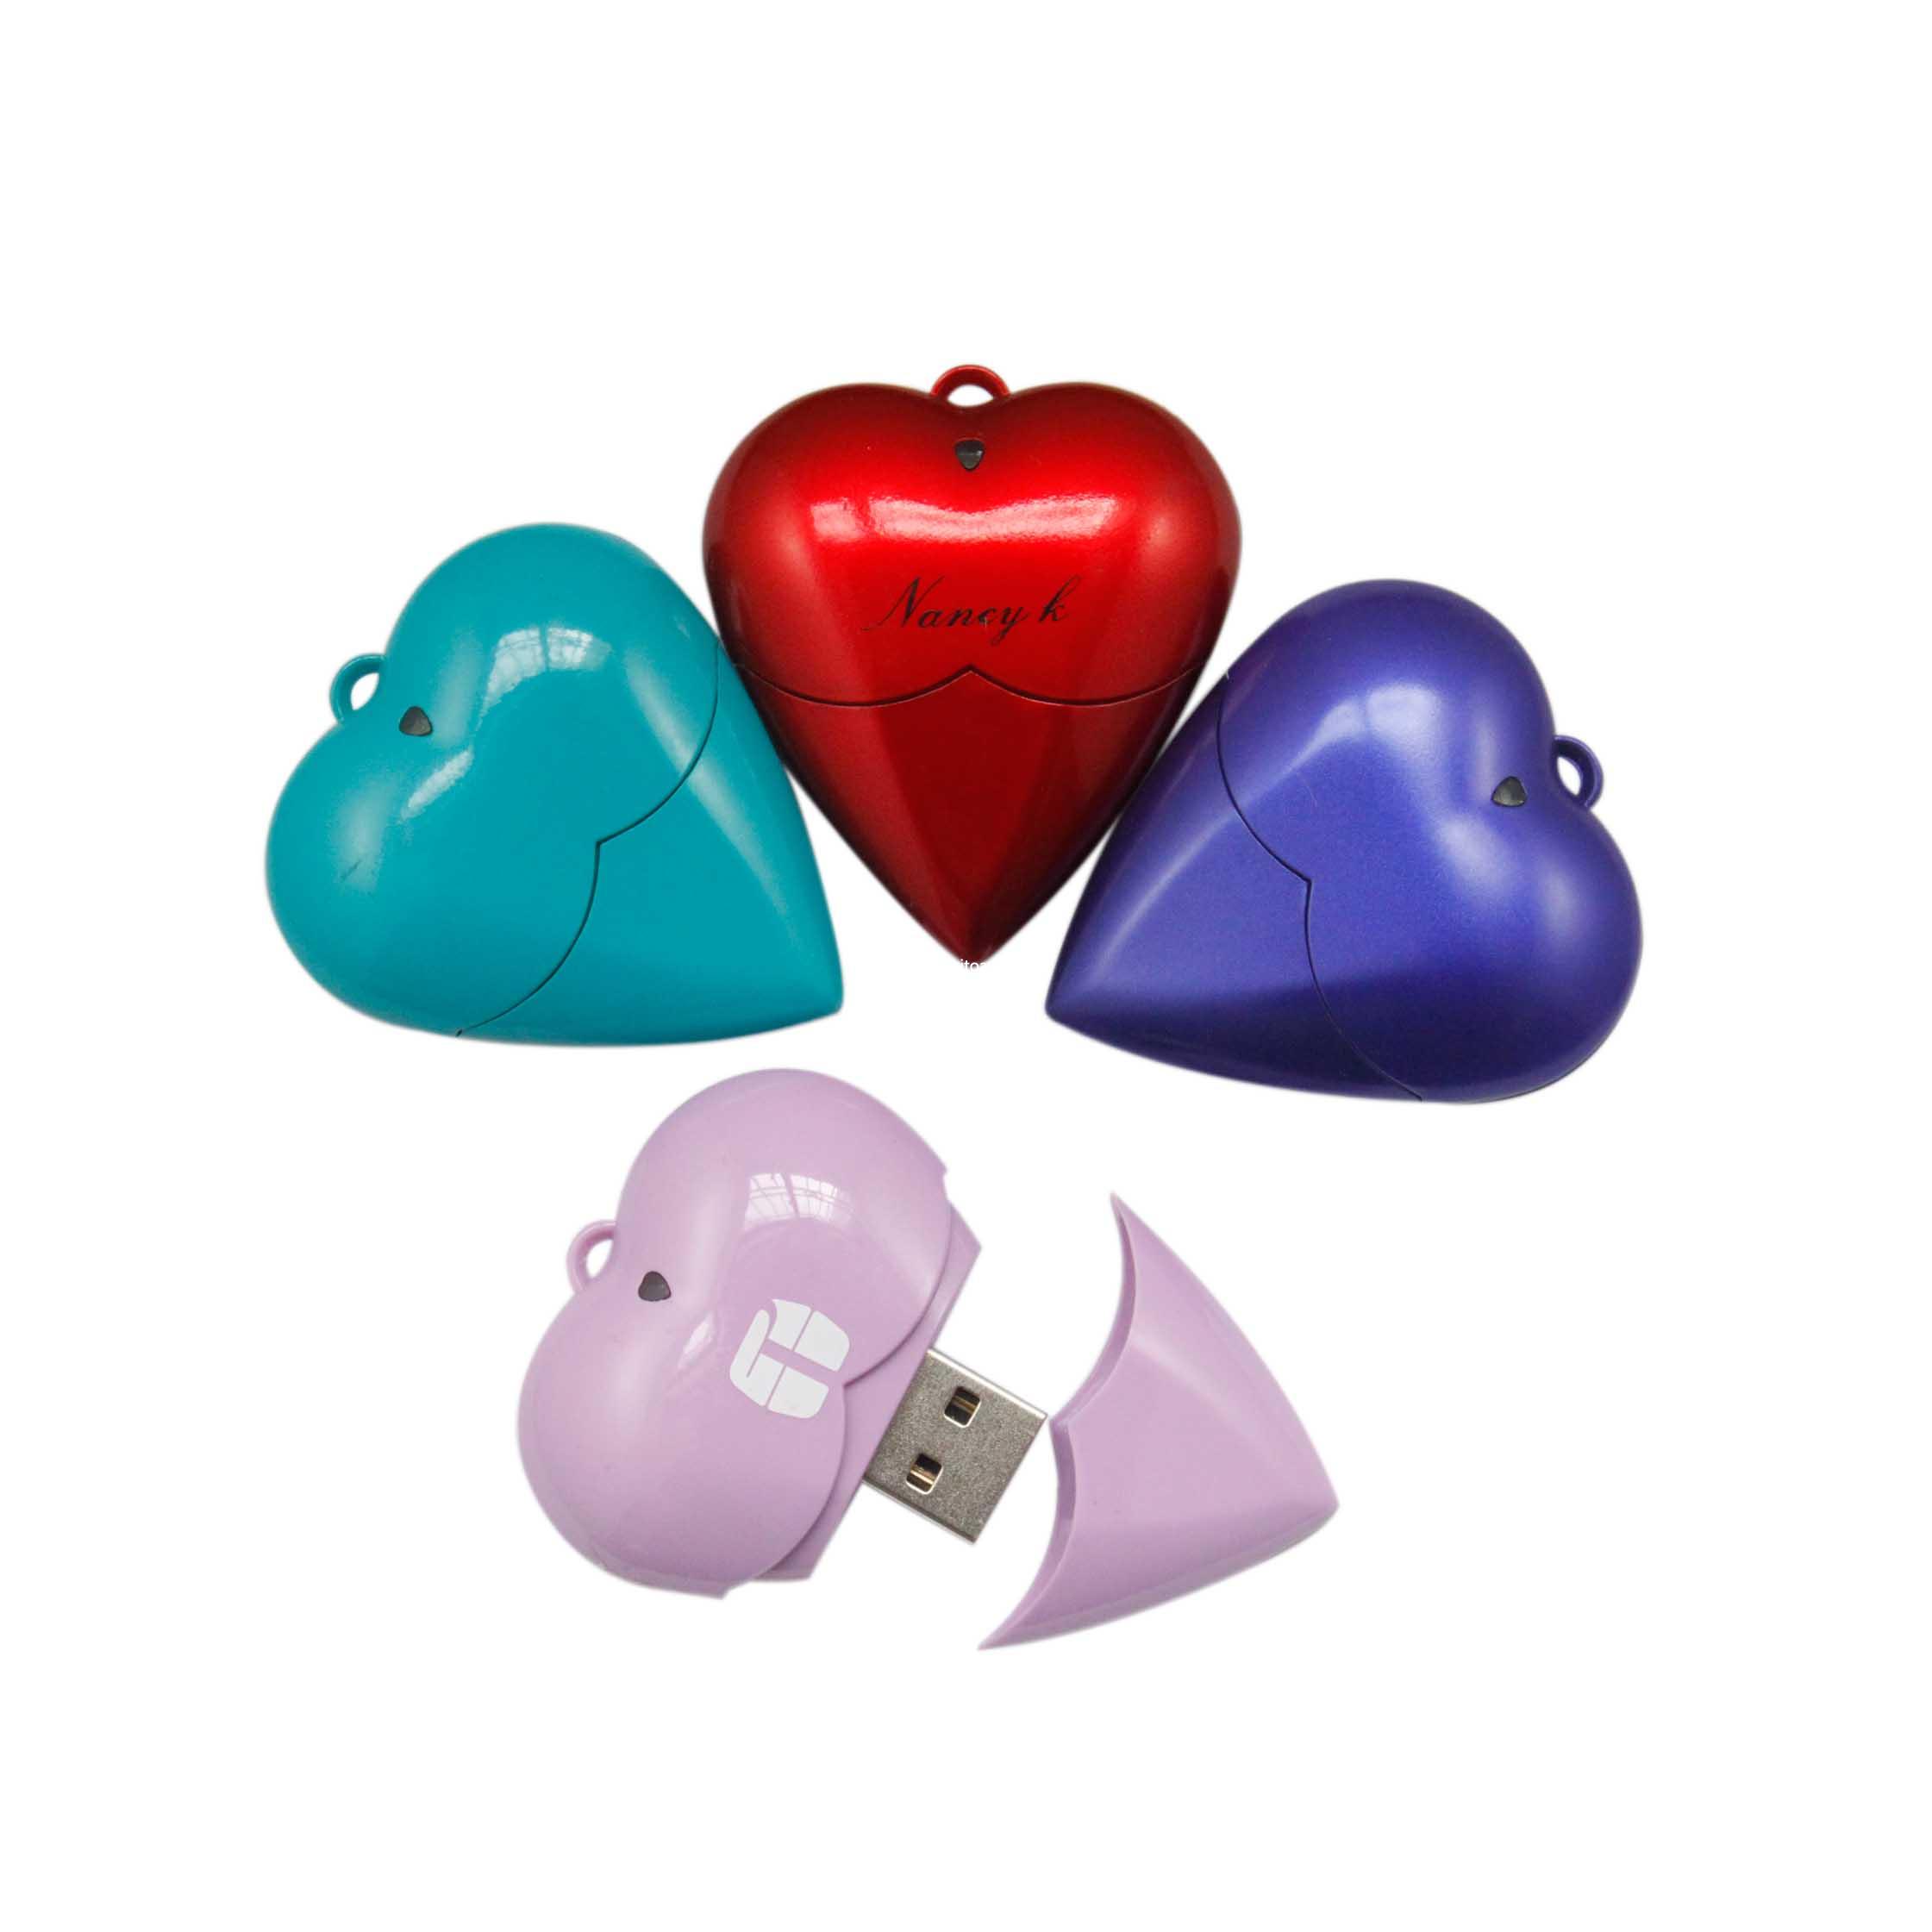 Red heart flash drive with different capacity